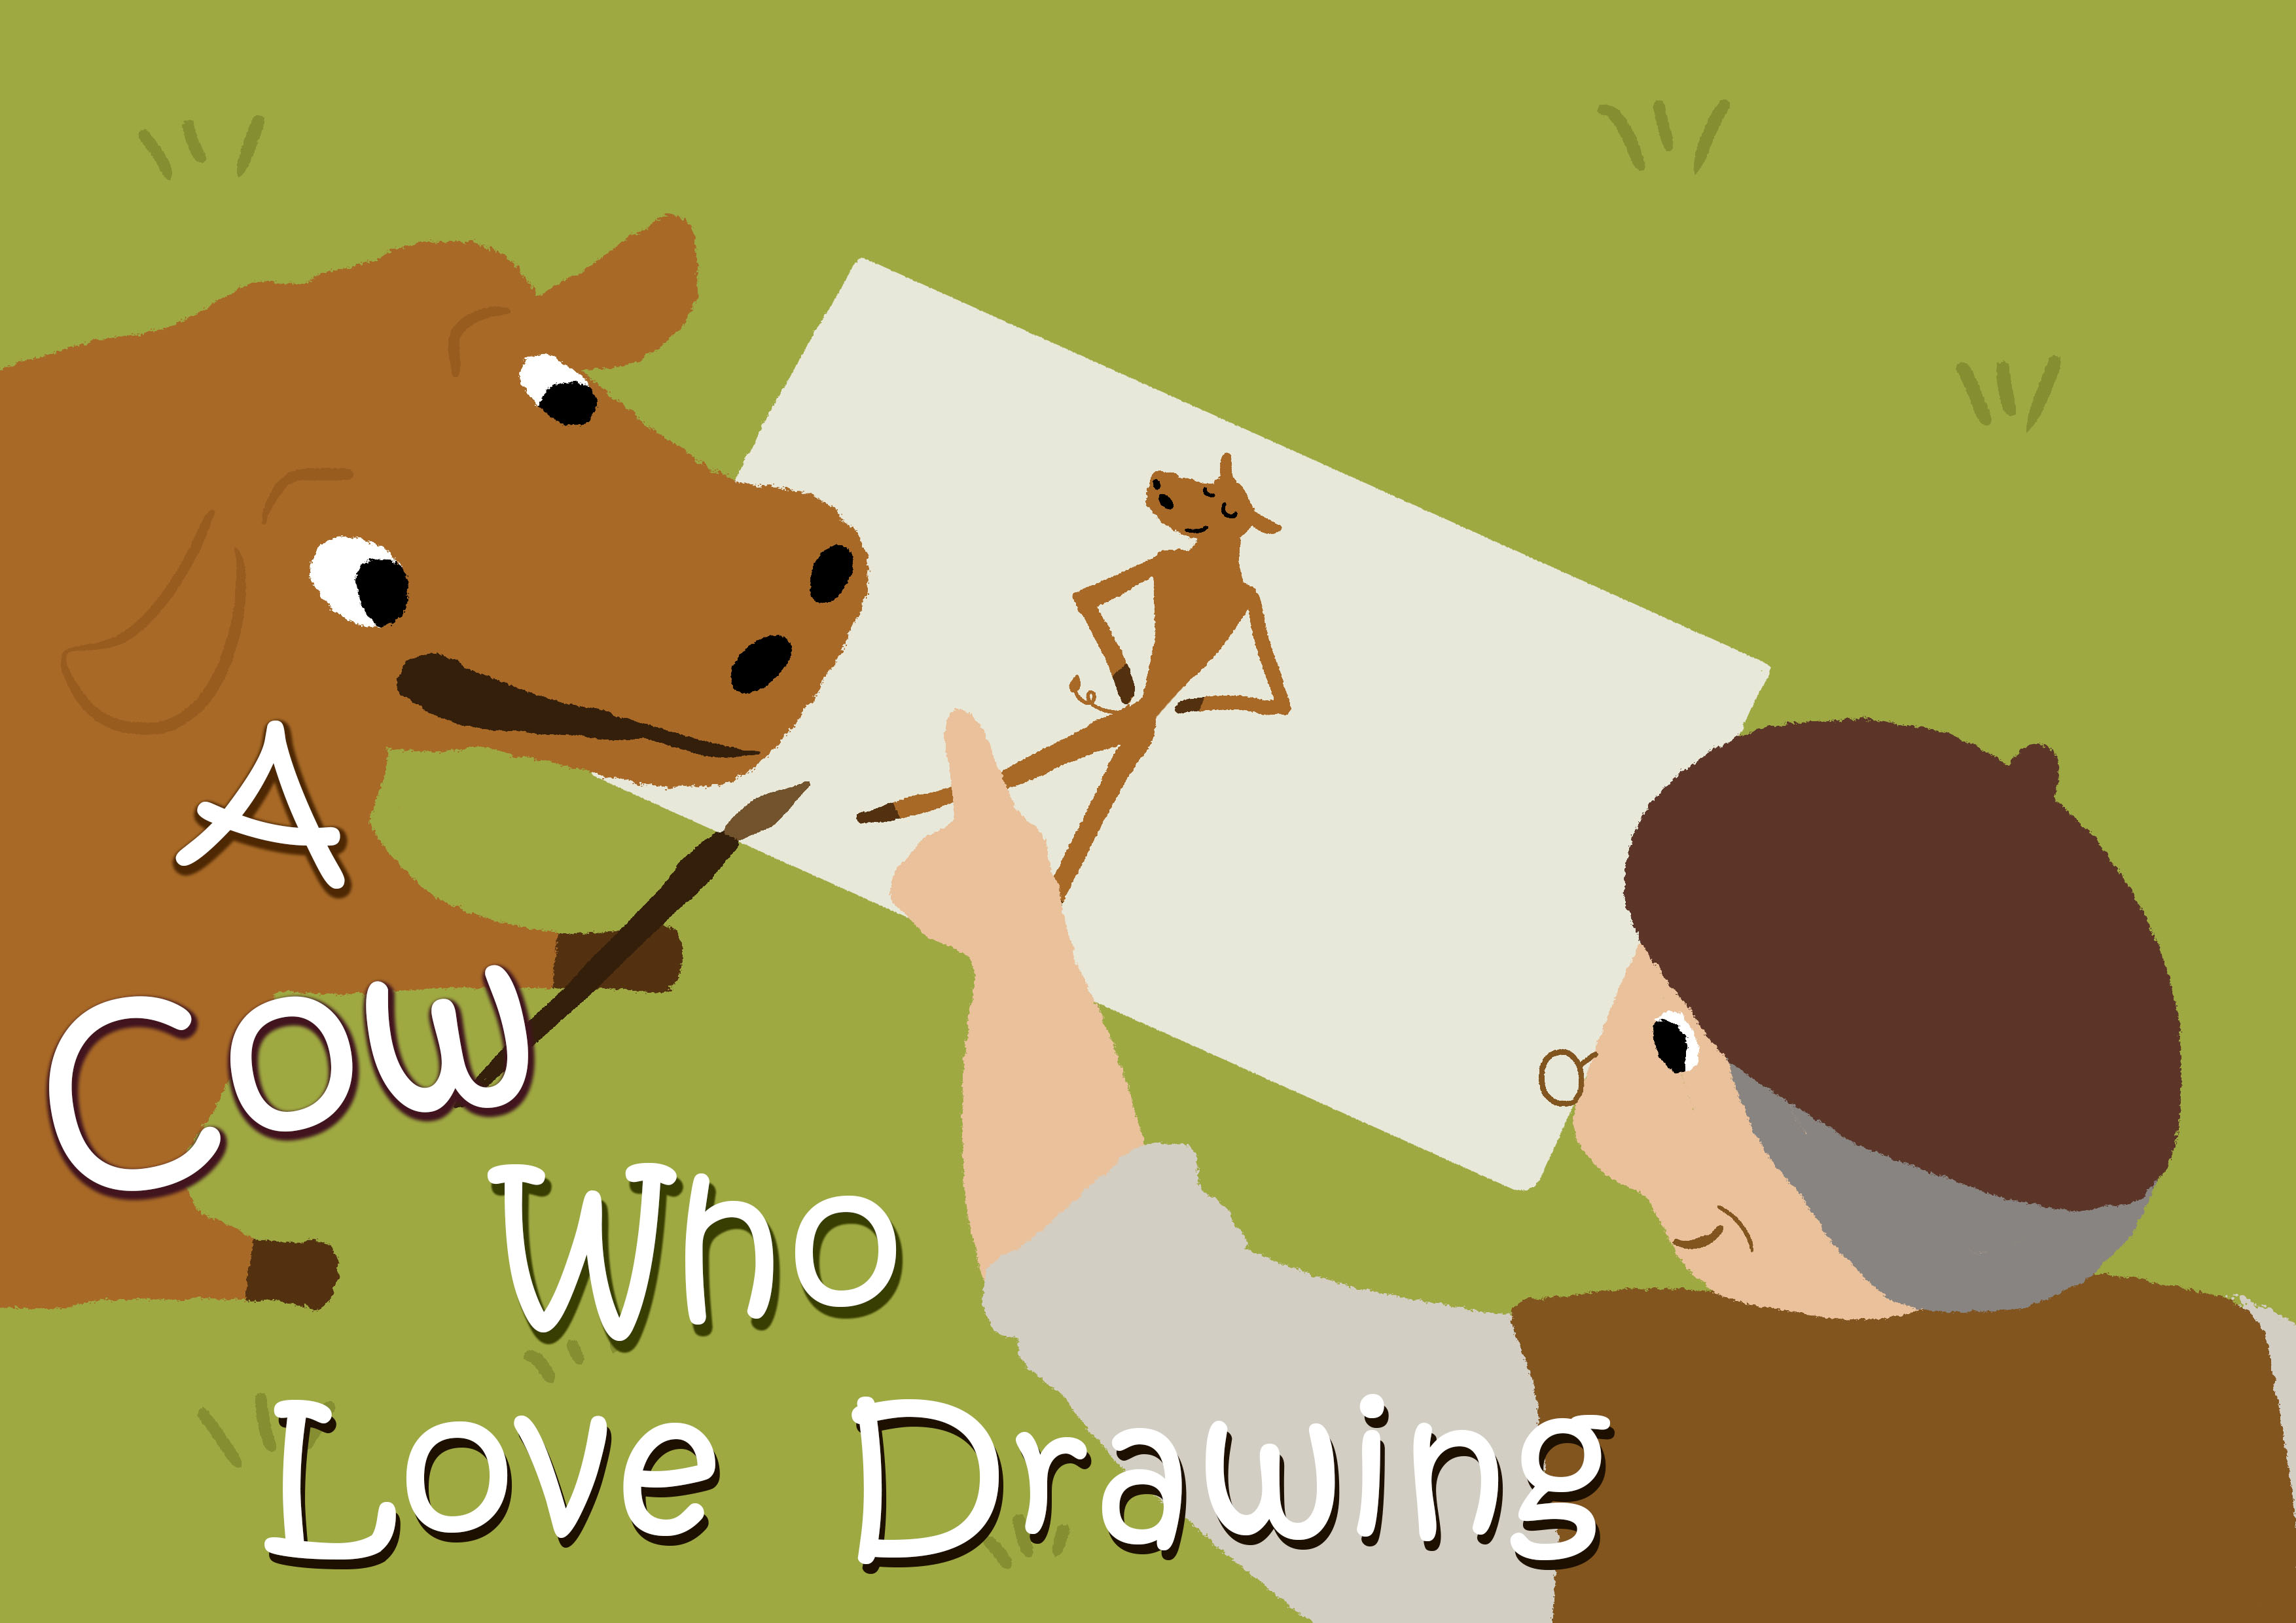 A Cow Who Love Drawing